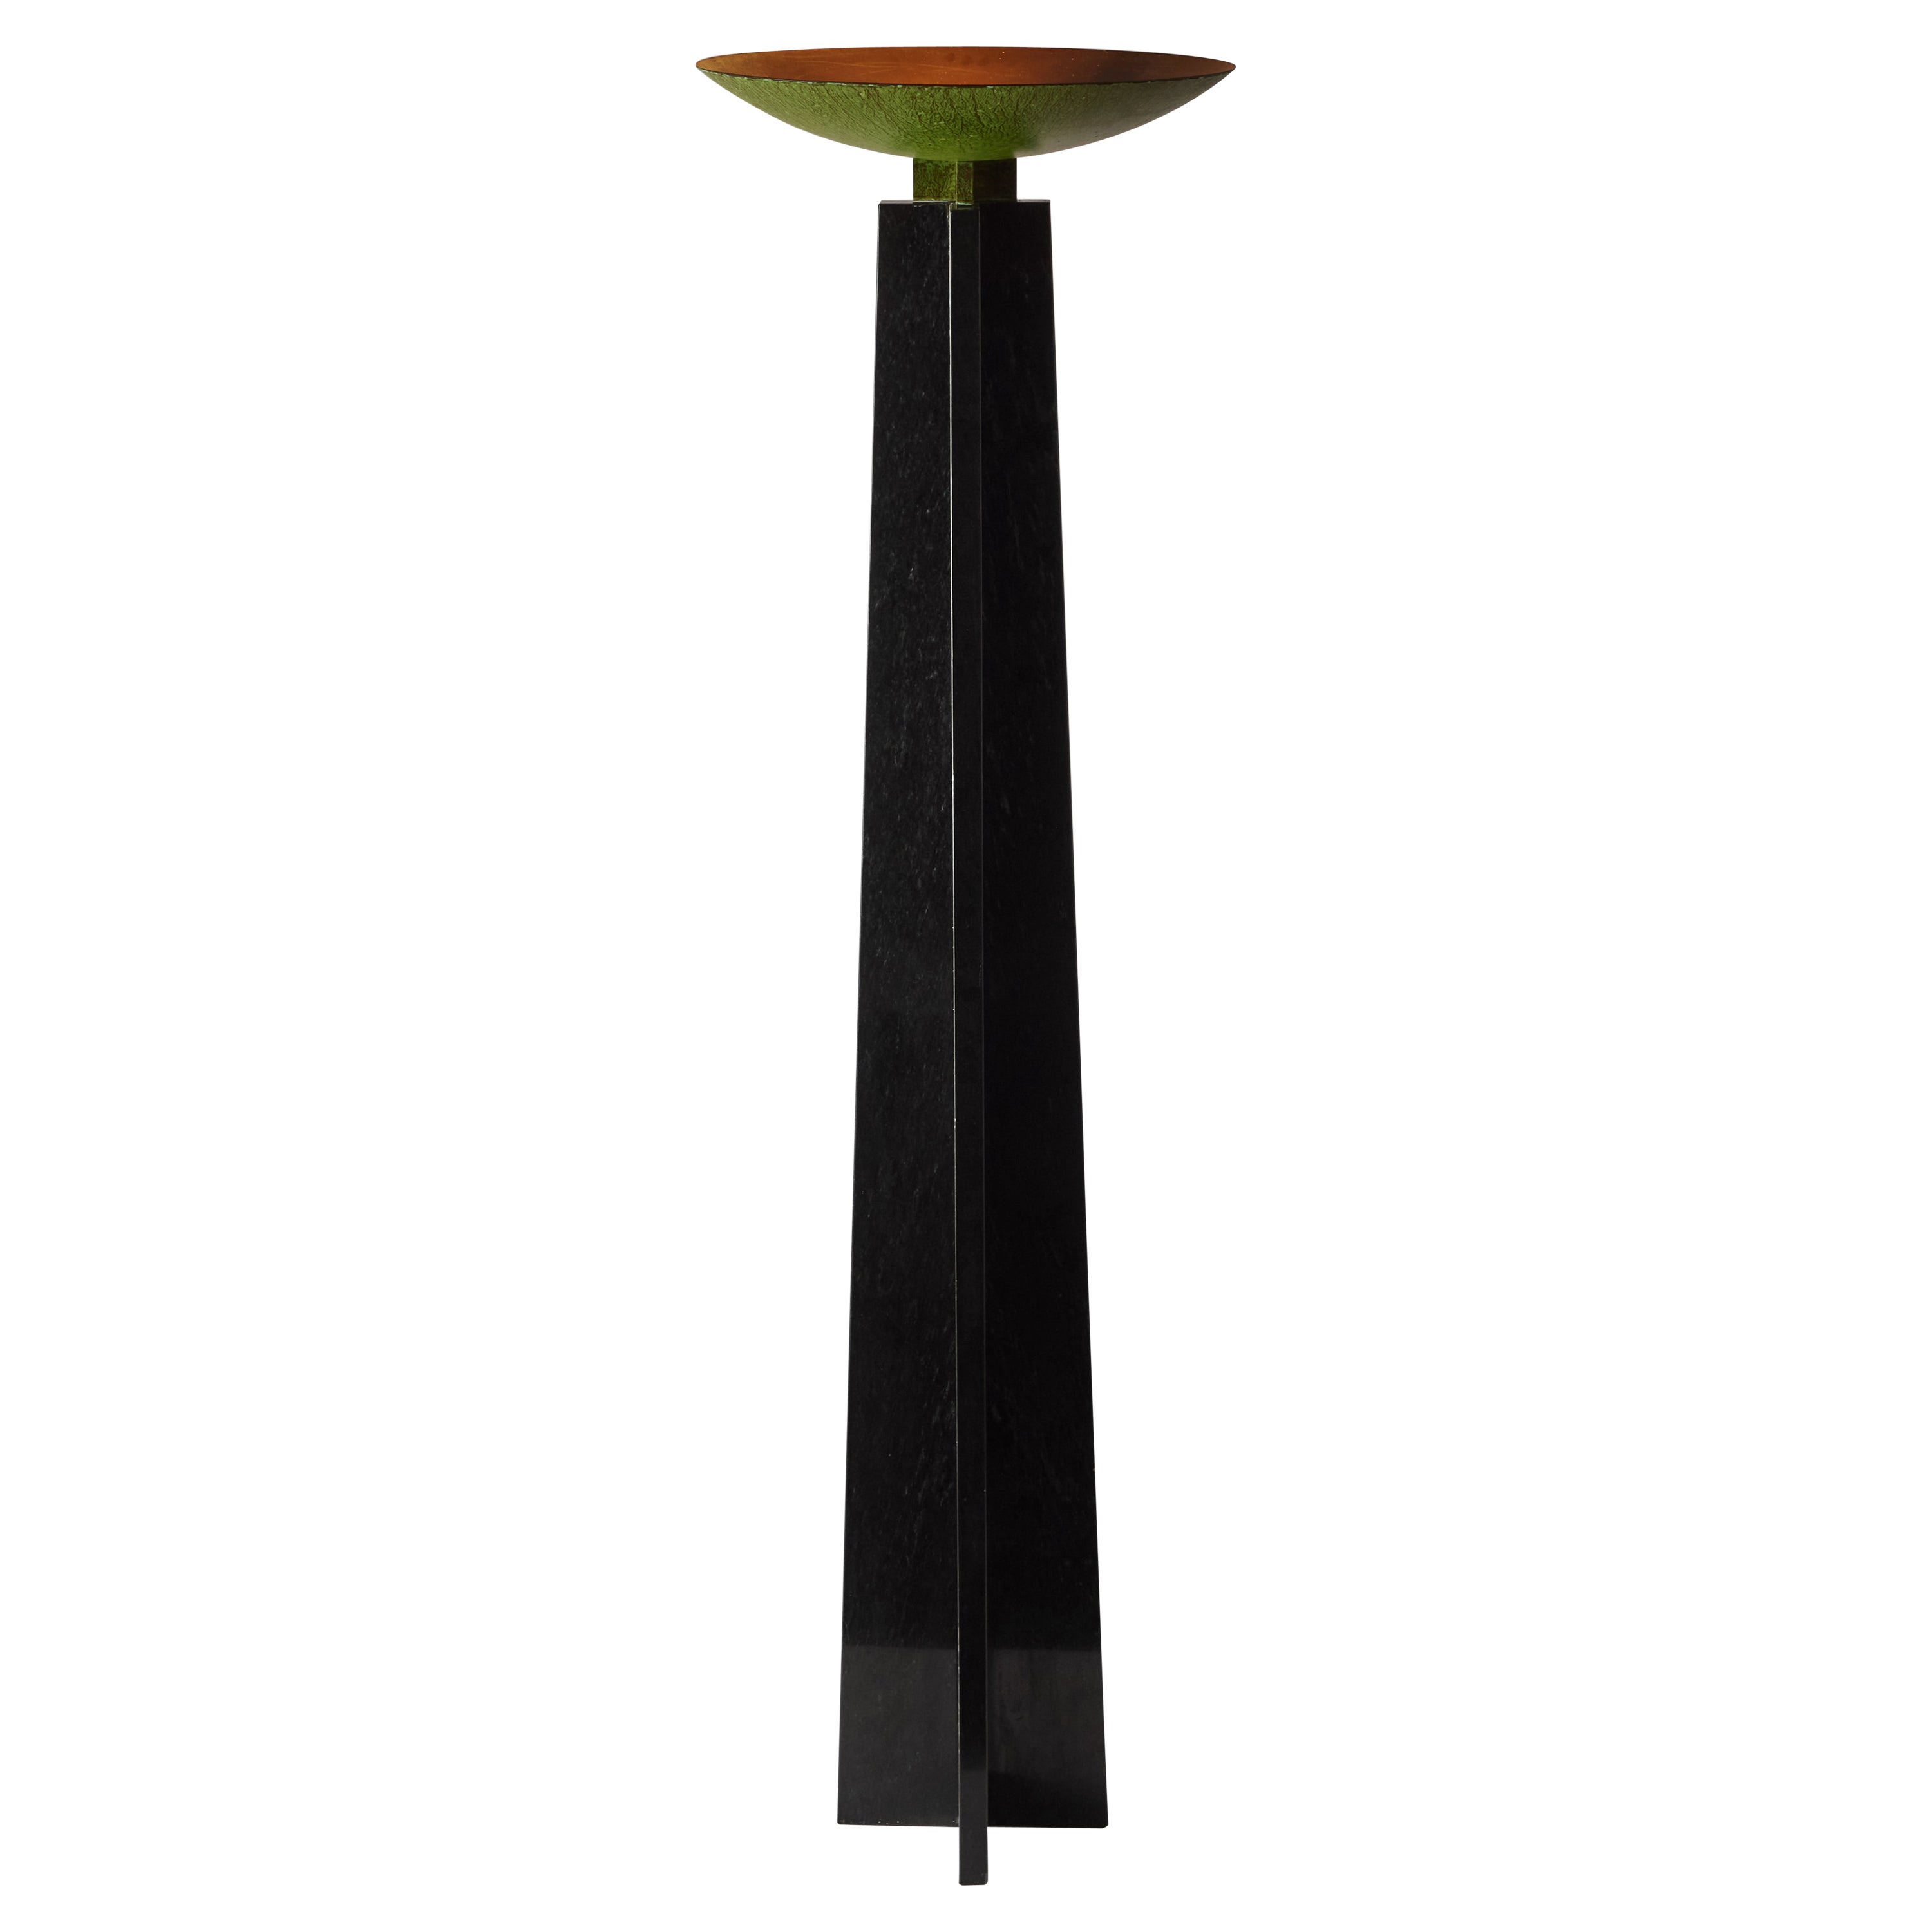 'Wagneriana' Floor Lamp by Lella and Massimo Vignelli For Sale